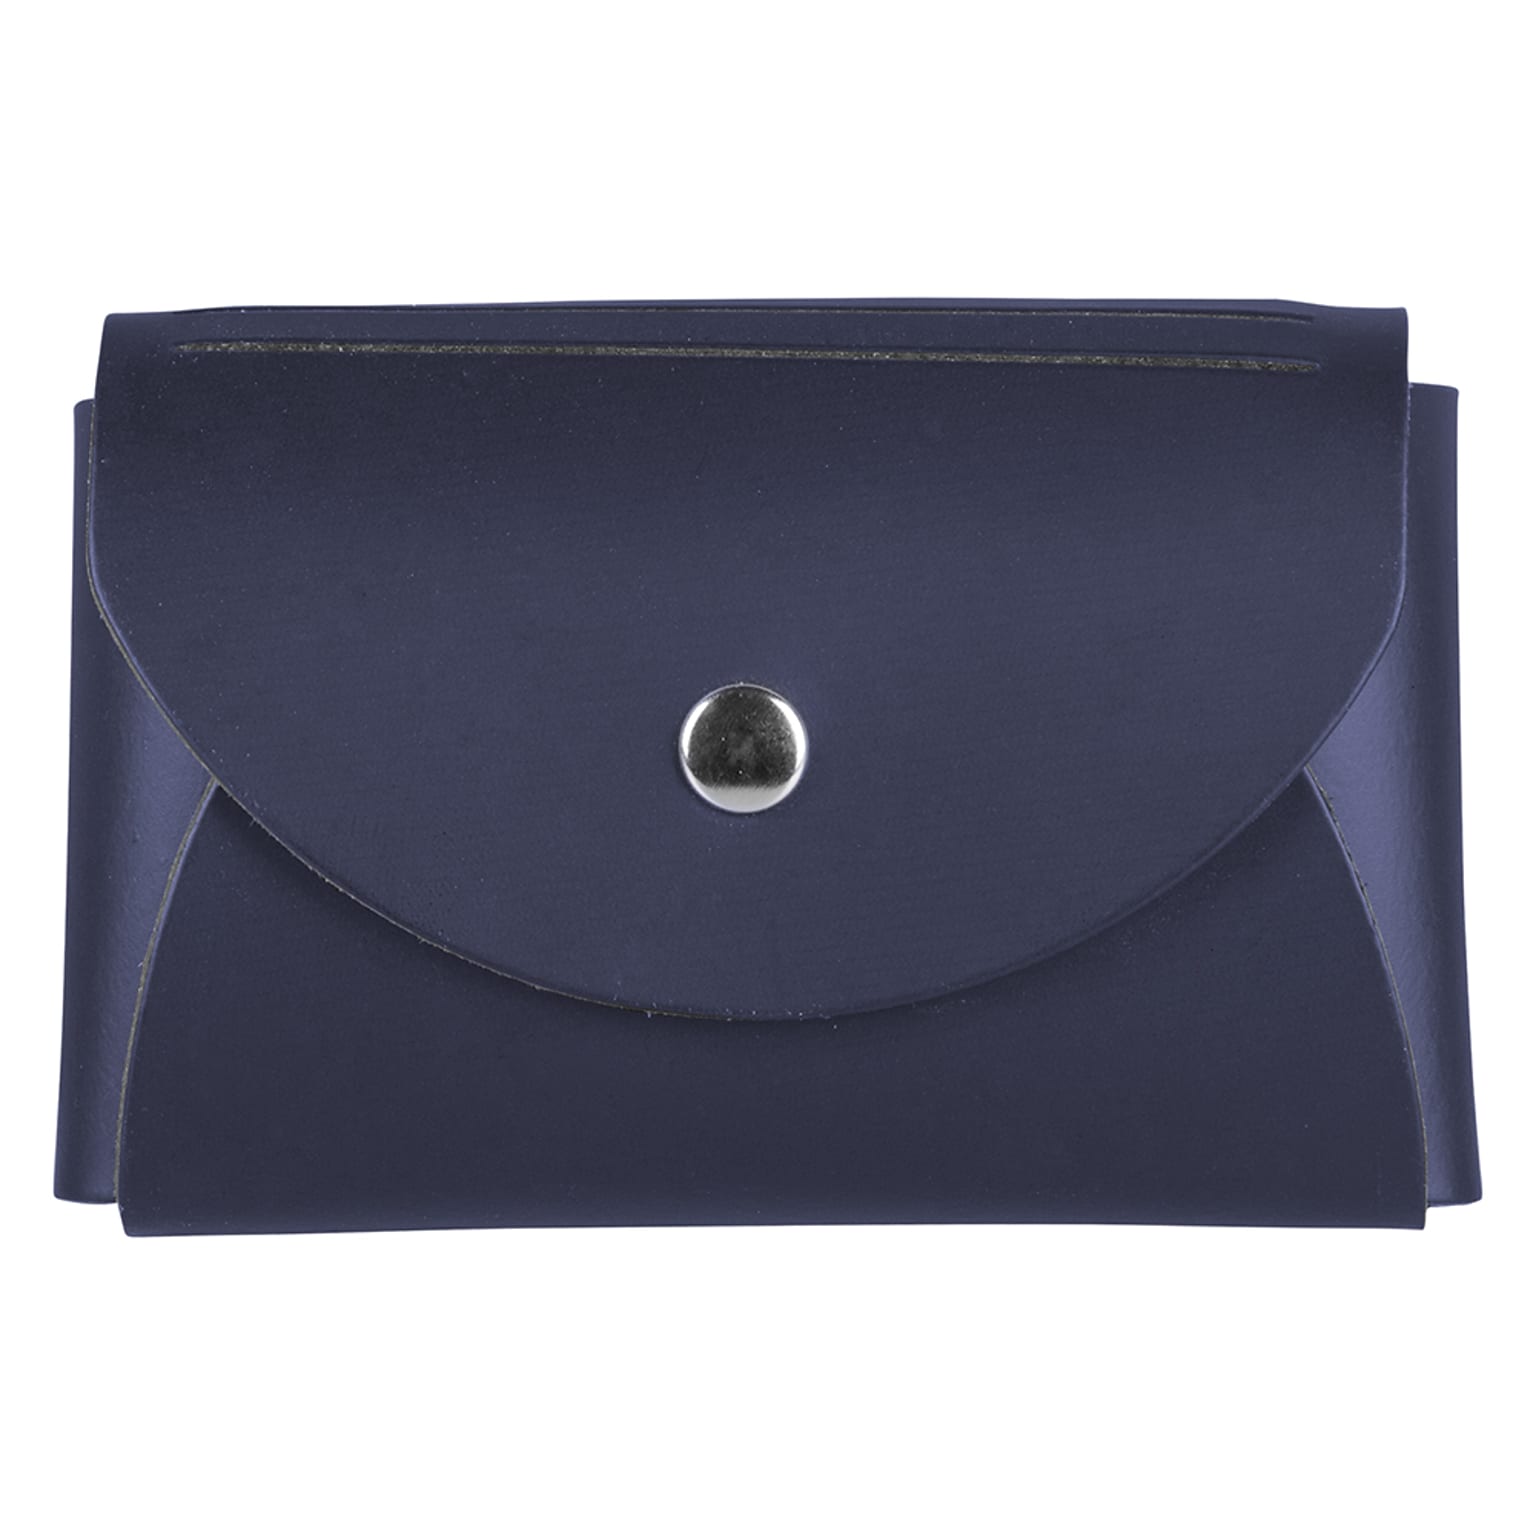 JAM Paper® Italian Leather Business Card Holder Case with Round Flap, Navy Blue, Sold Individually (233329917)